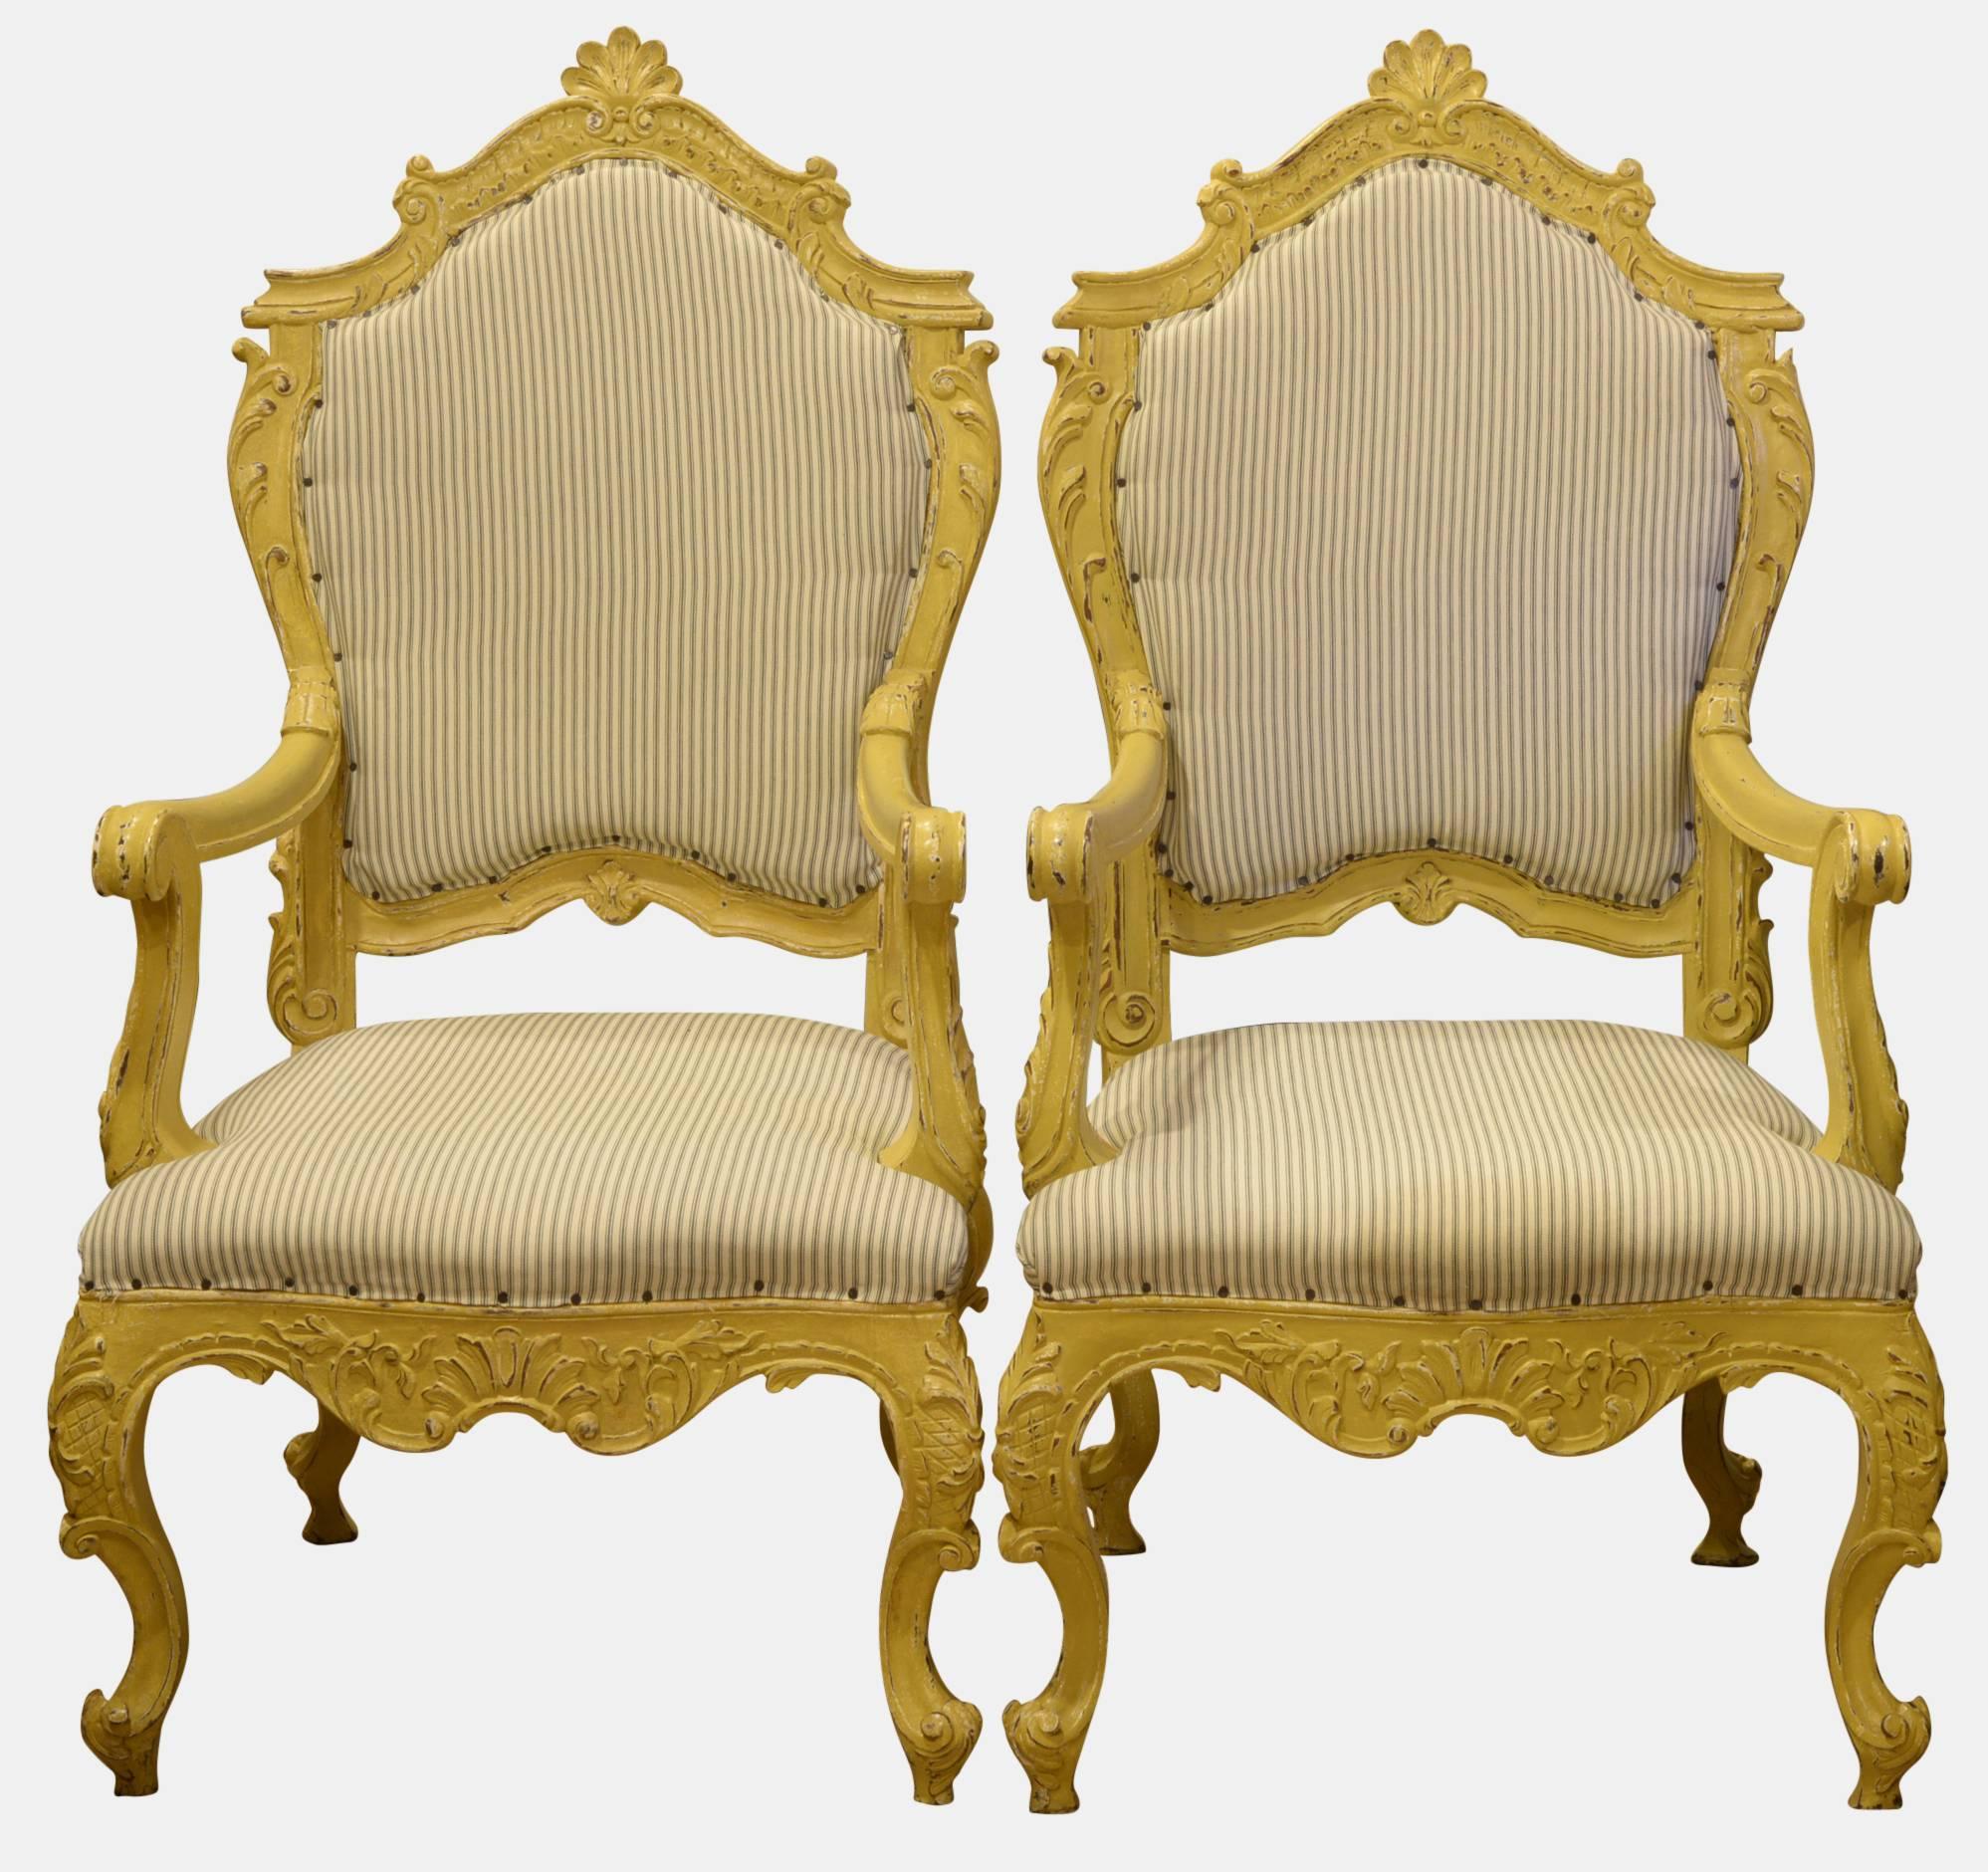 A pair of painted French armchairs, carved walnut upholstered in ticking, ready for new fabric.

19th century.